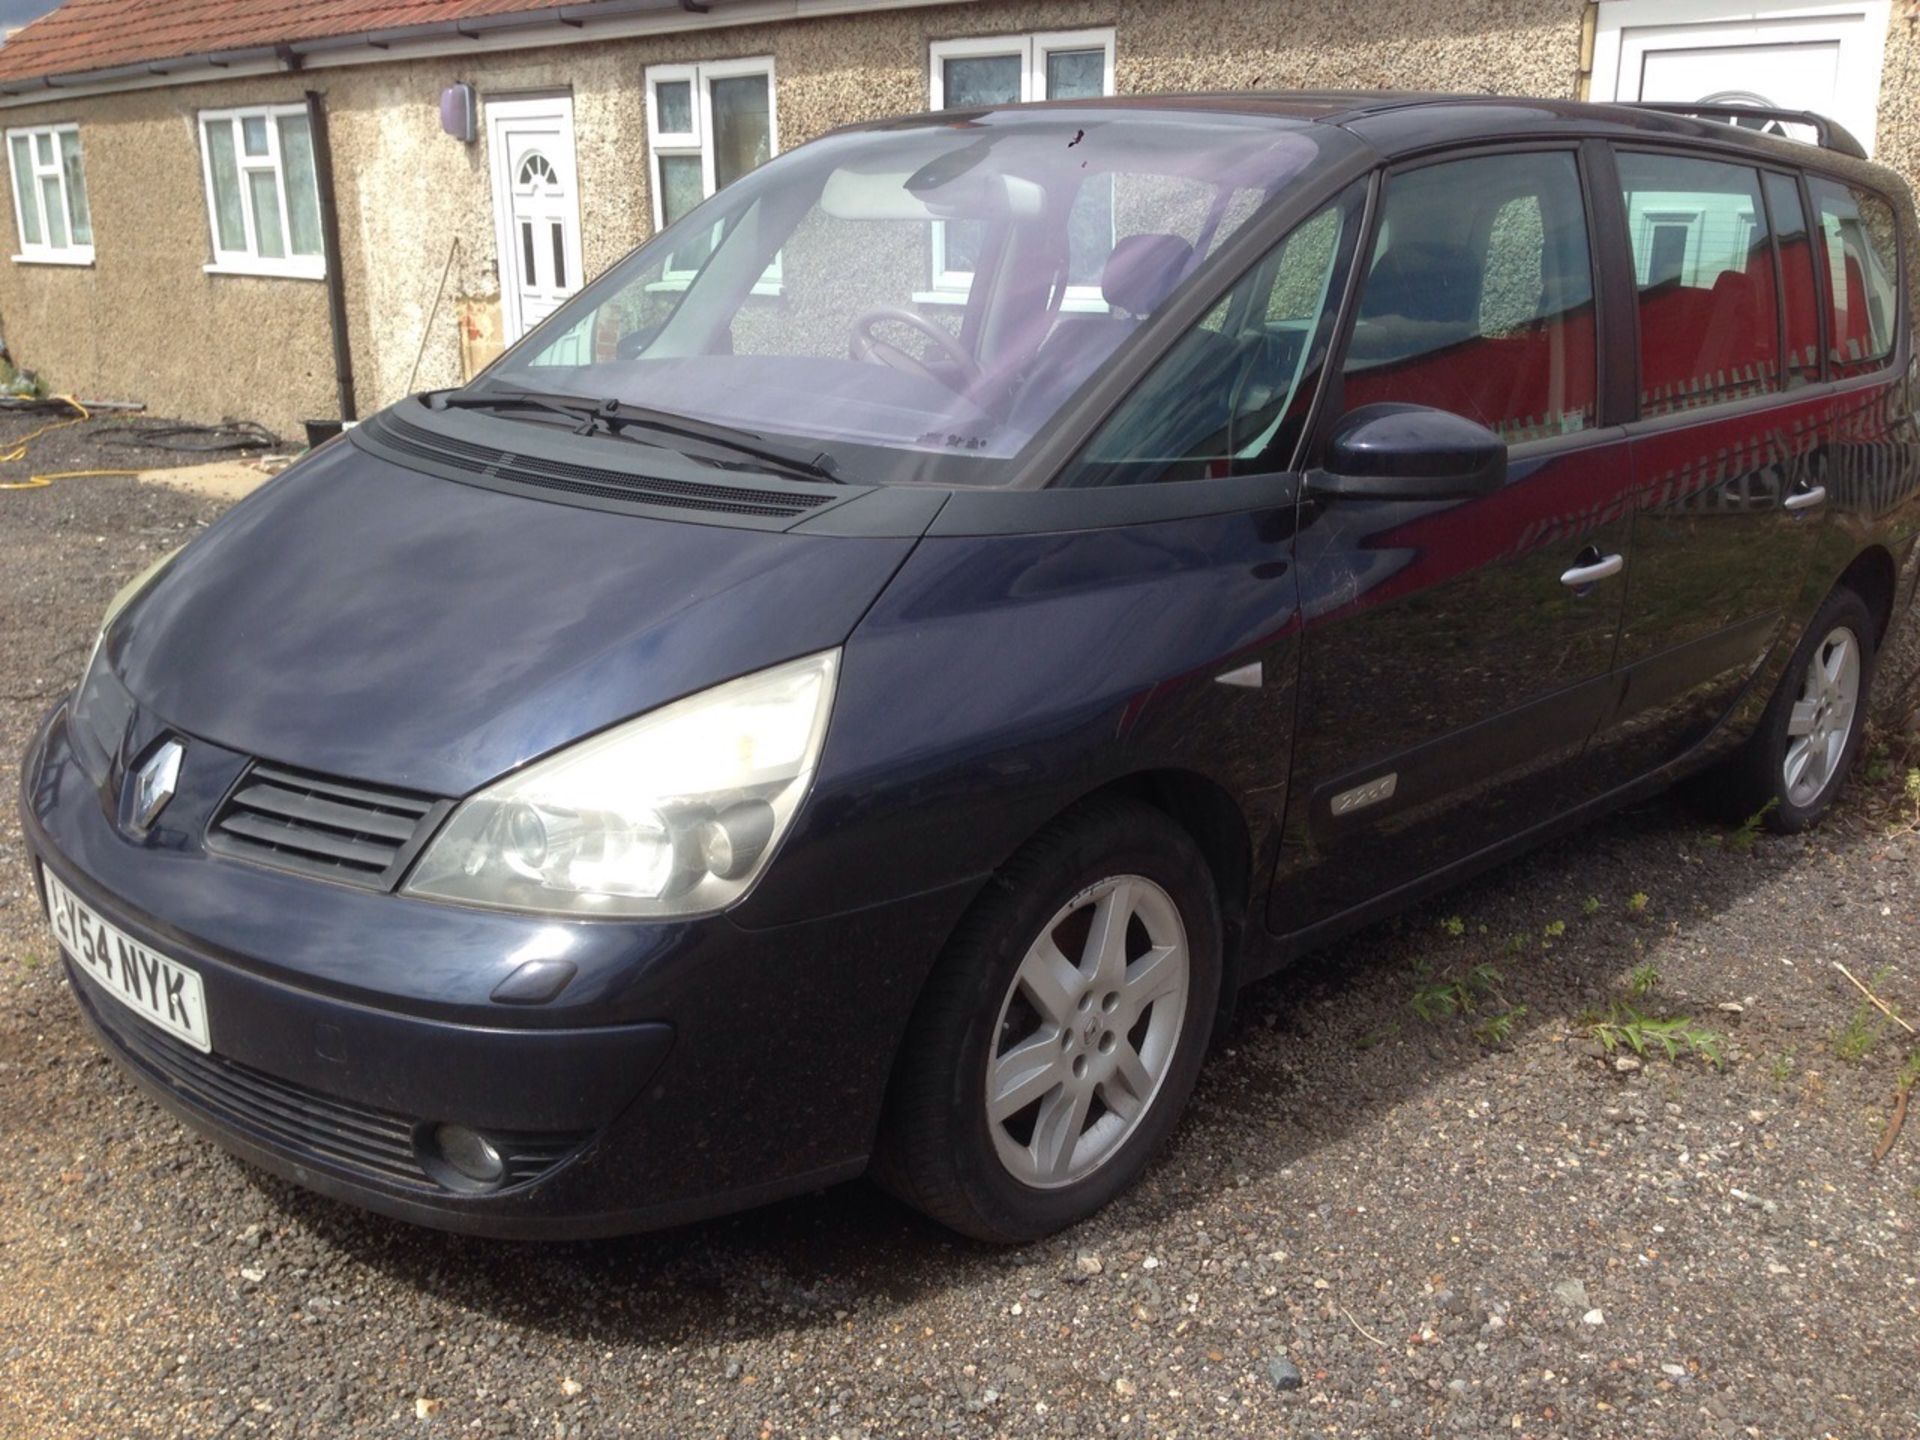 2005/54 Renault grand espace initiale dci a 2.2 diesel MPV - Image 3 of 7